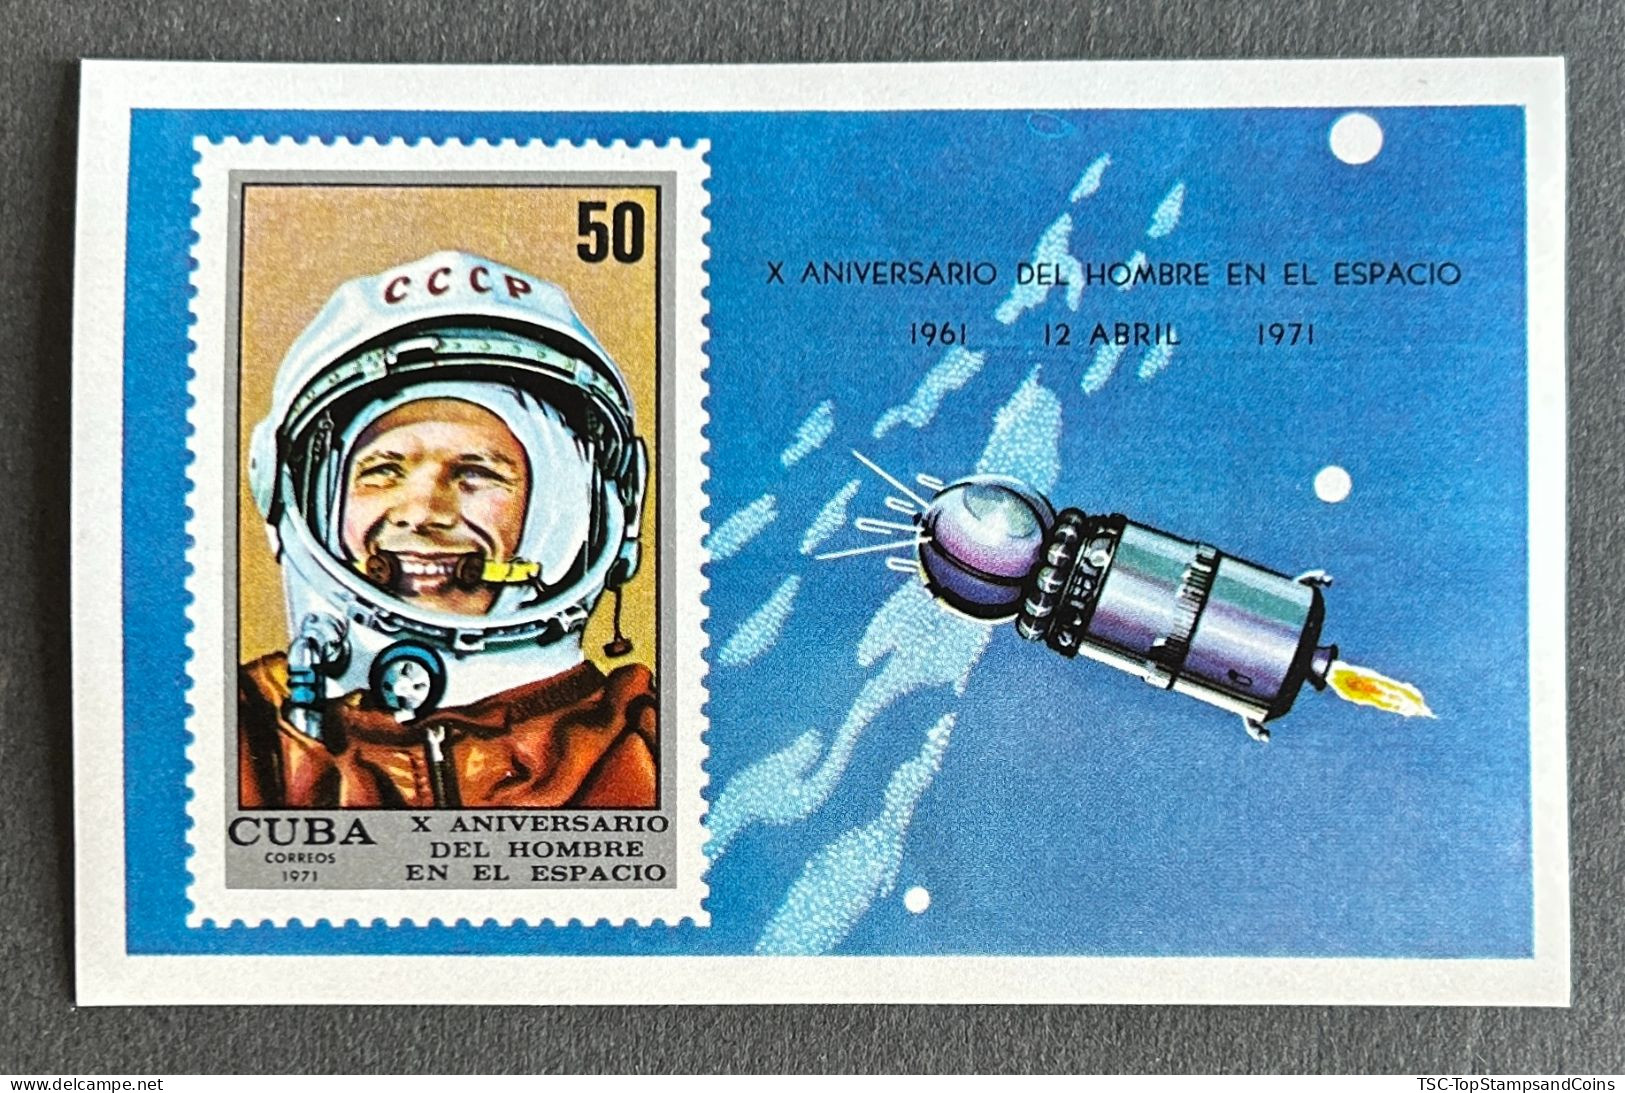 CUBBF36MNH - Manned Space Flight 10th Anniversary - BS 36 MNH - Cuba - 1971 - Blocs-feuillets